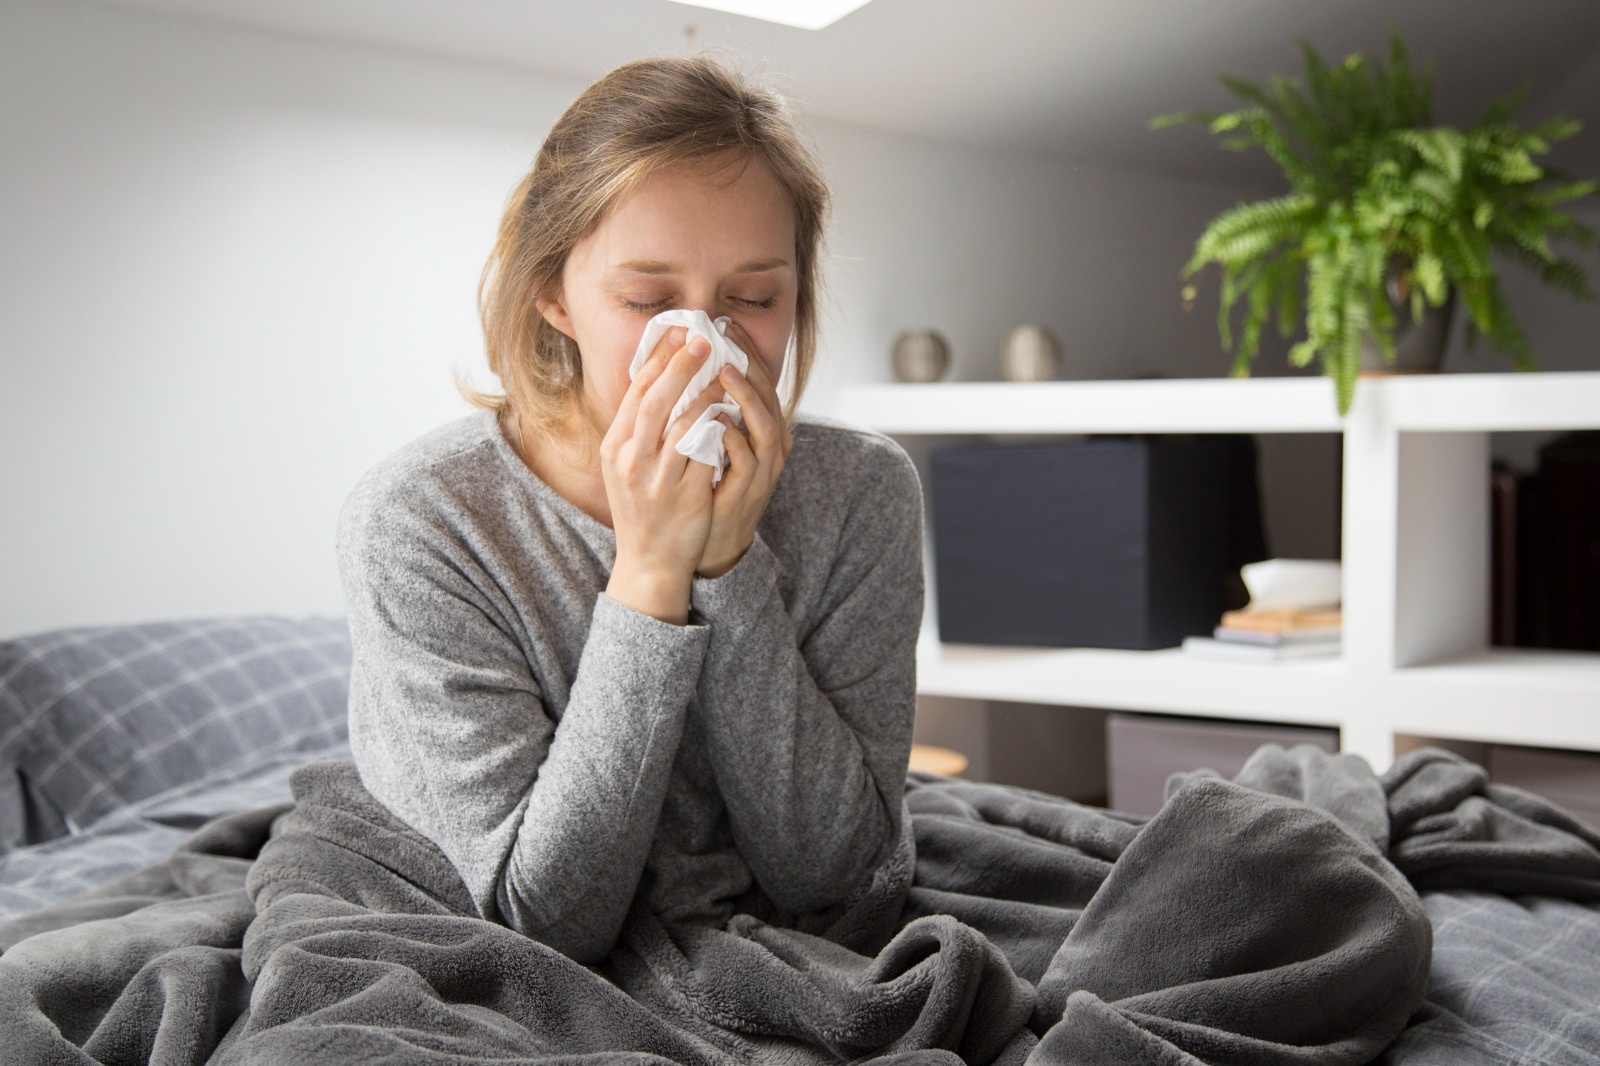 What is the best Ayurvedic remedy for curing fever, cold, flu?